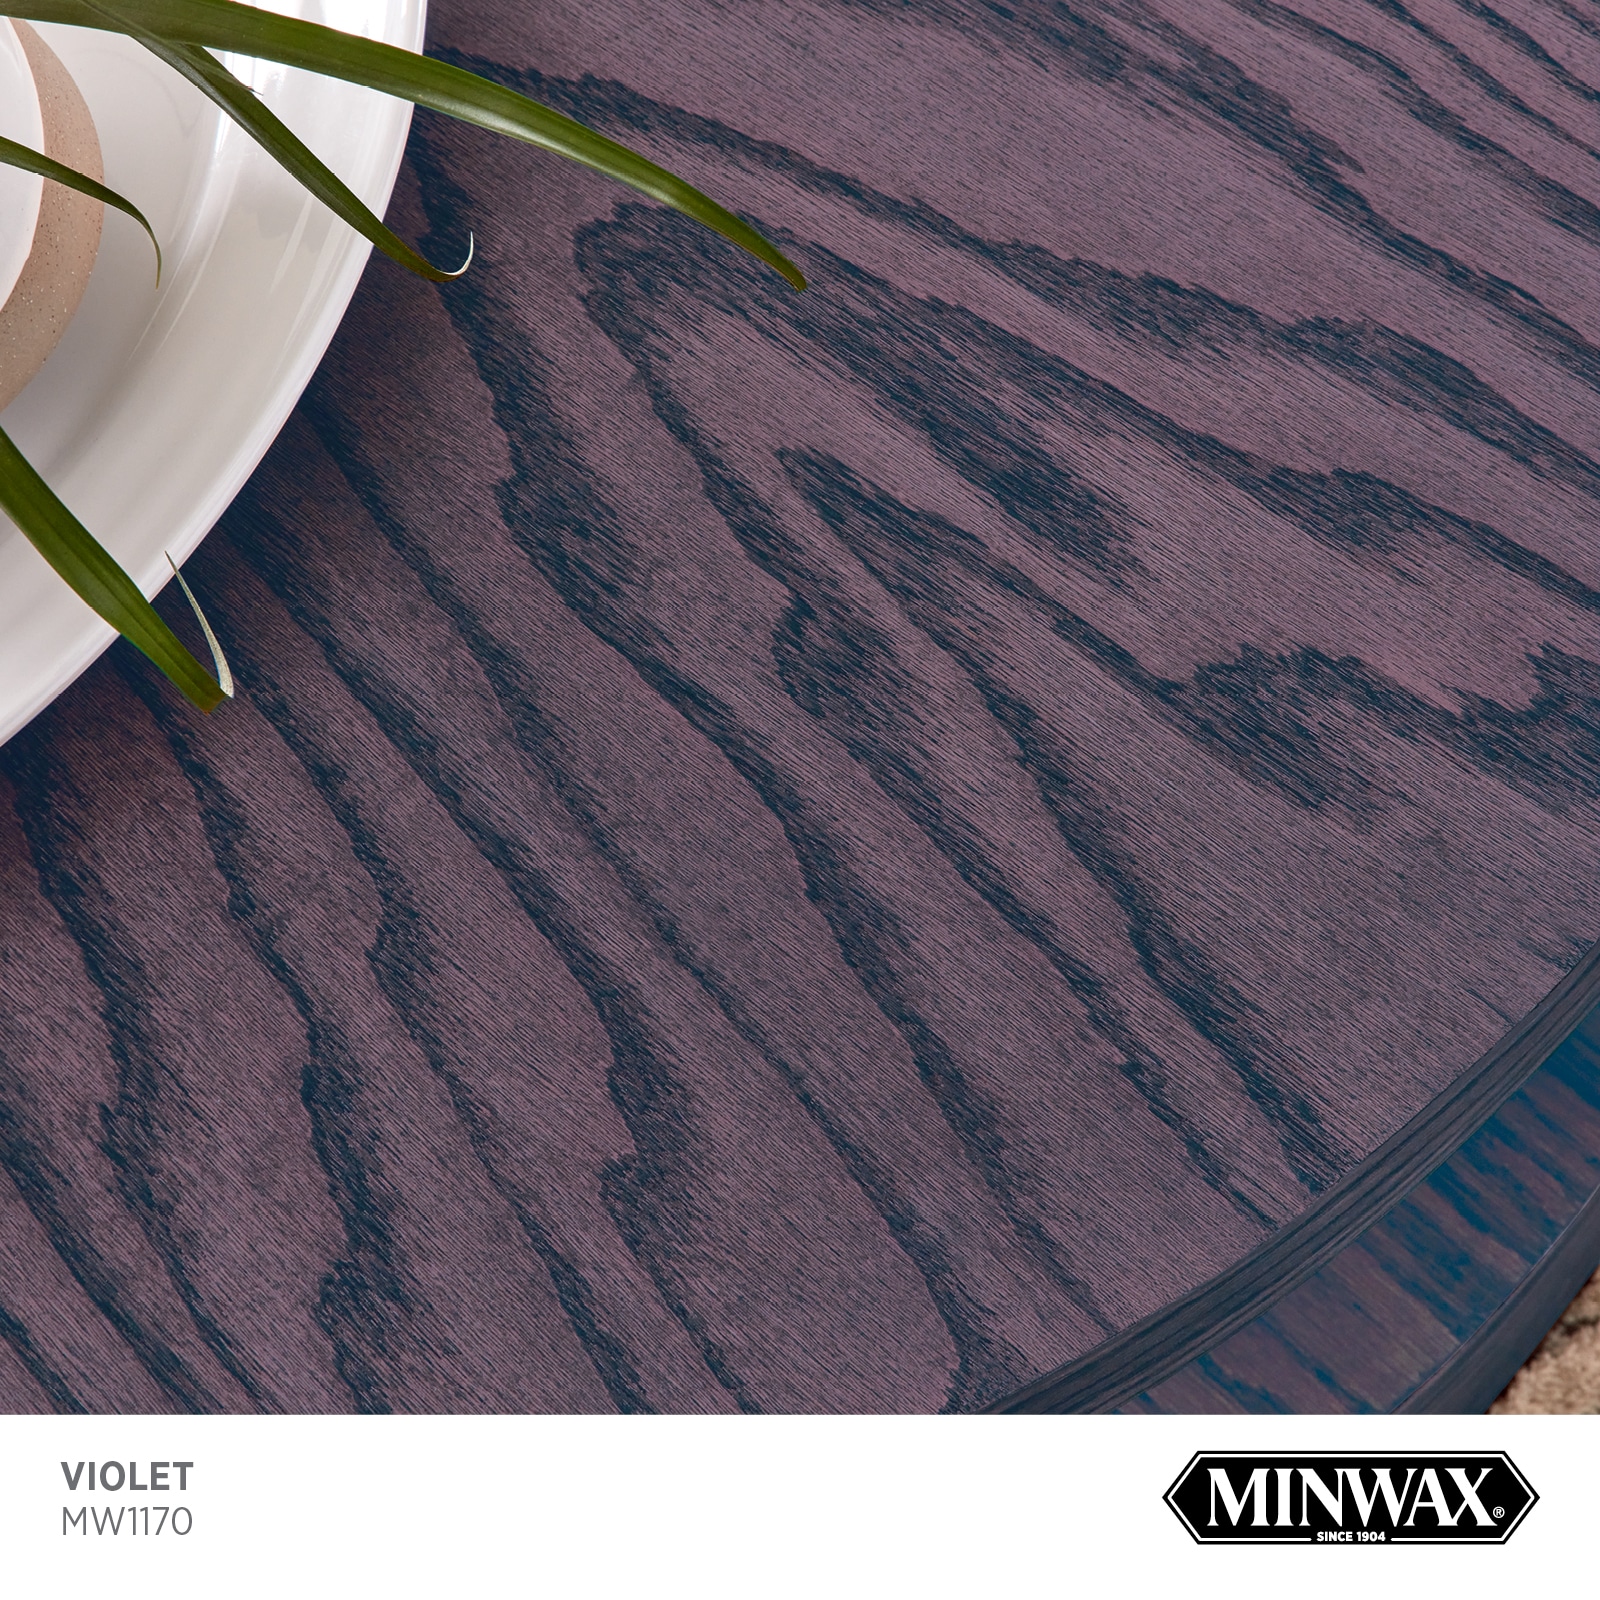 Minwax Wood Finish Water-Based Violet Mw1170 Semi-Transparent Interior  Stain (1-Quart) in the Interior Stains department at